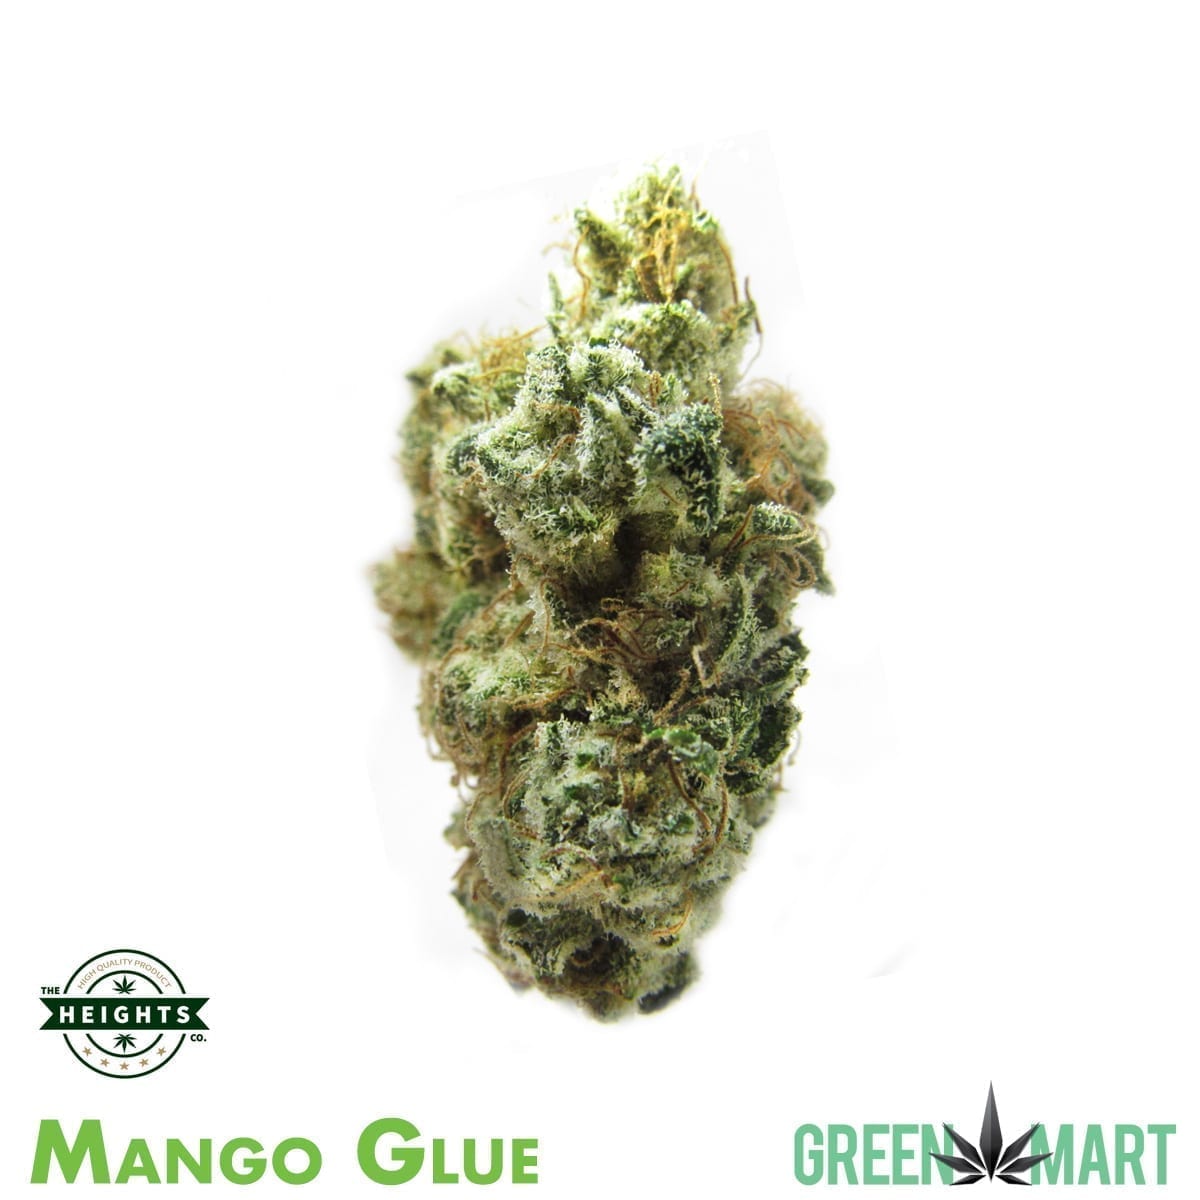 Mango Glue by the Heights Co.